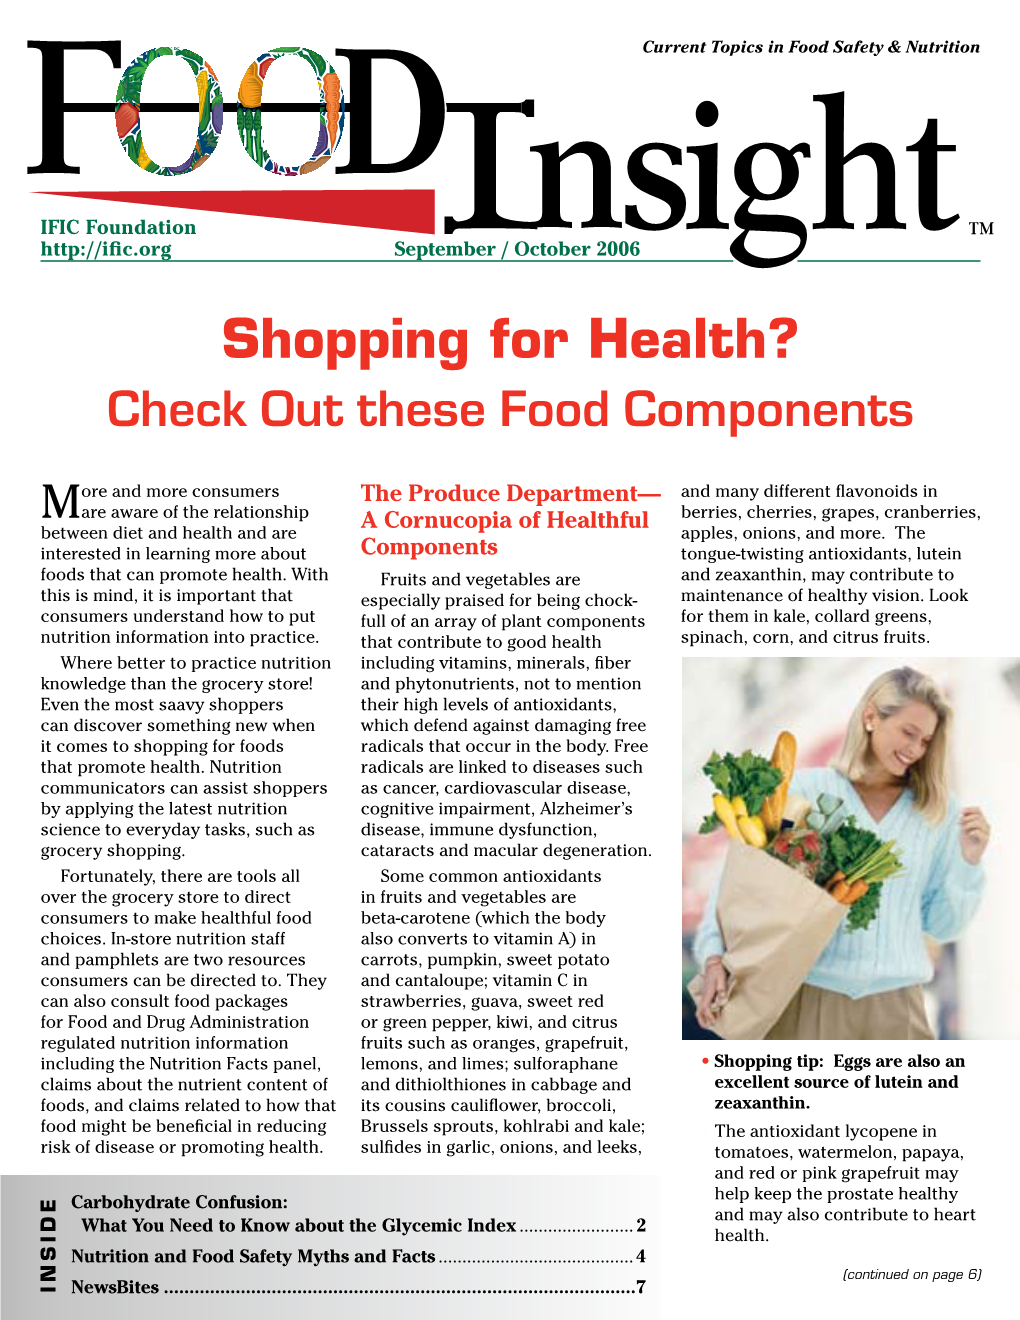 Shopping for Health? Check out These Food Components